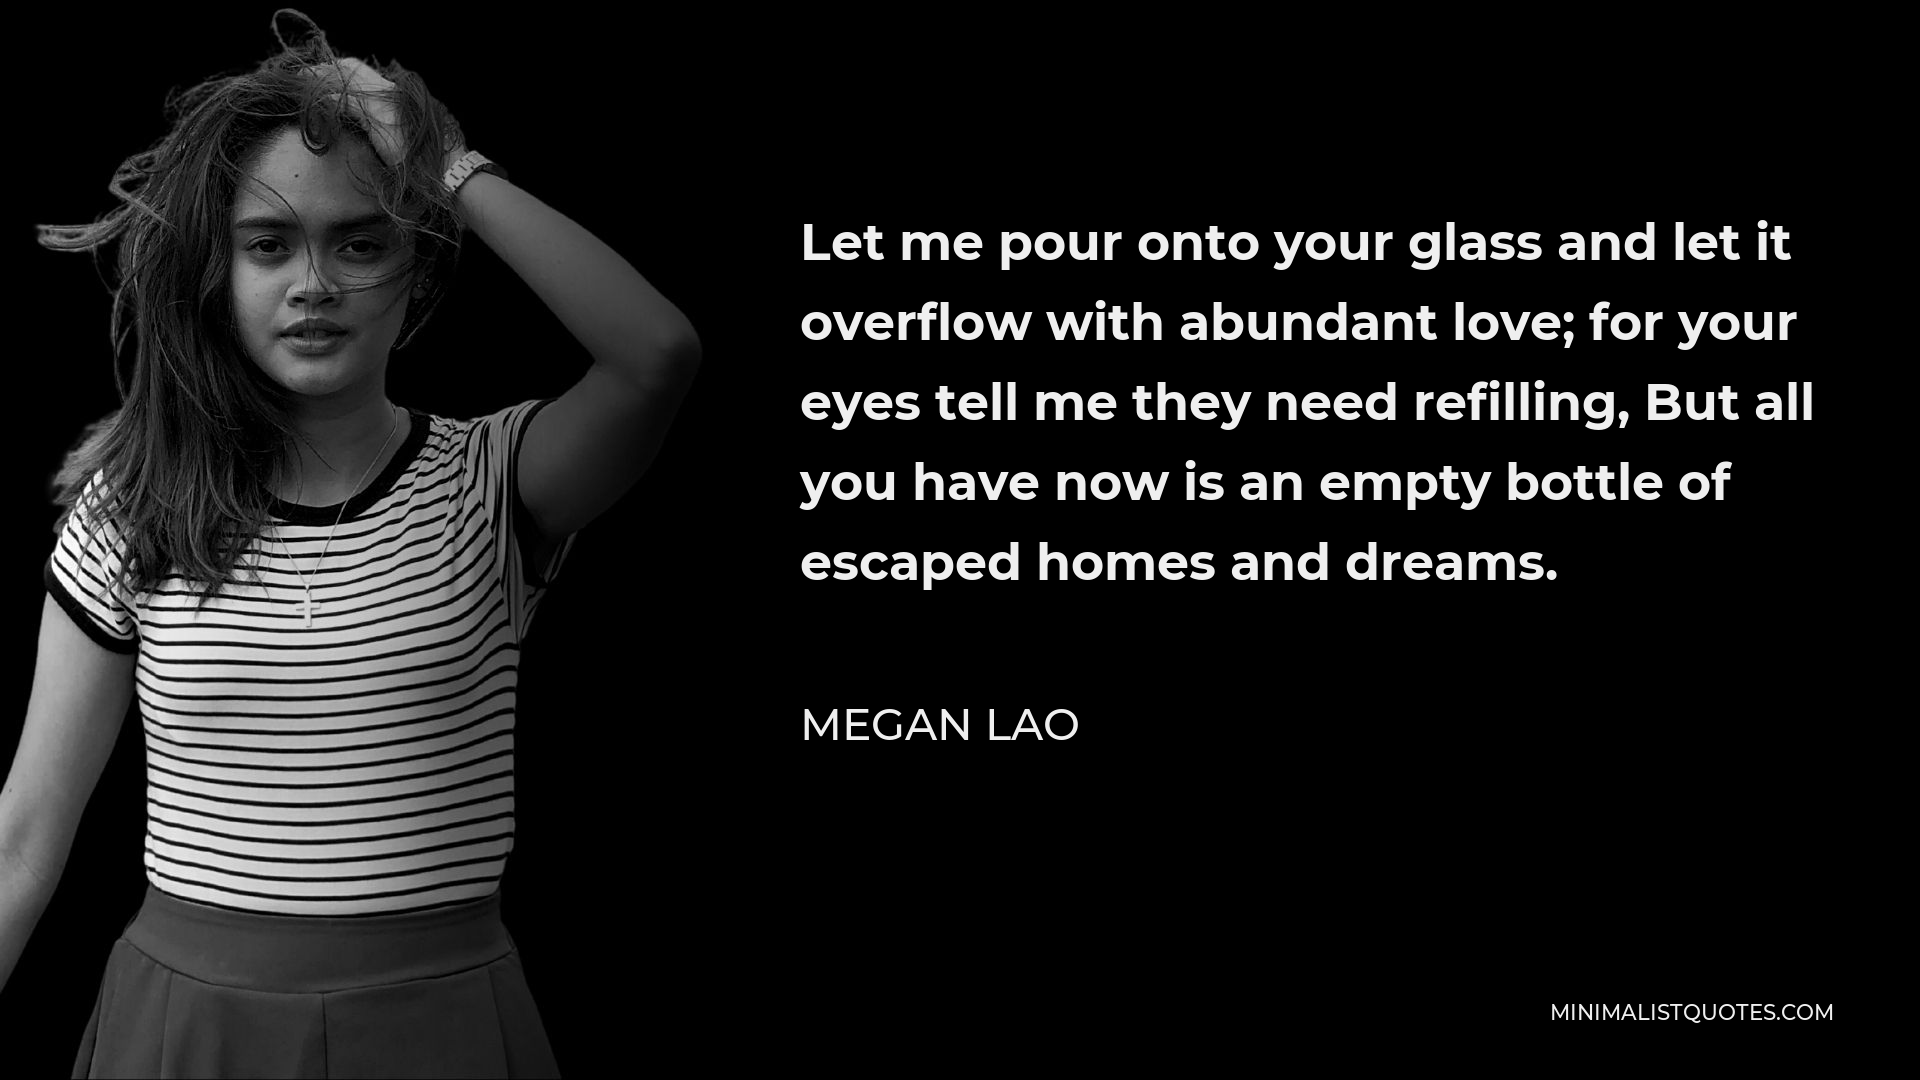 Megan Lao Quote - Let me pour onto your glass and let it overflow with abundant love; for your eyes tell me they need refilling, But all you have now is an empty bottle of escaped homes and dreams.